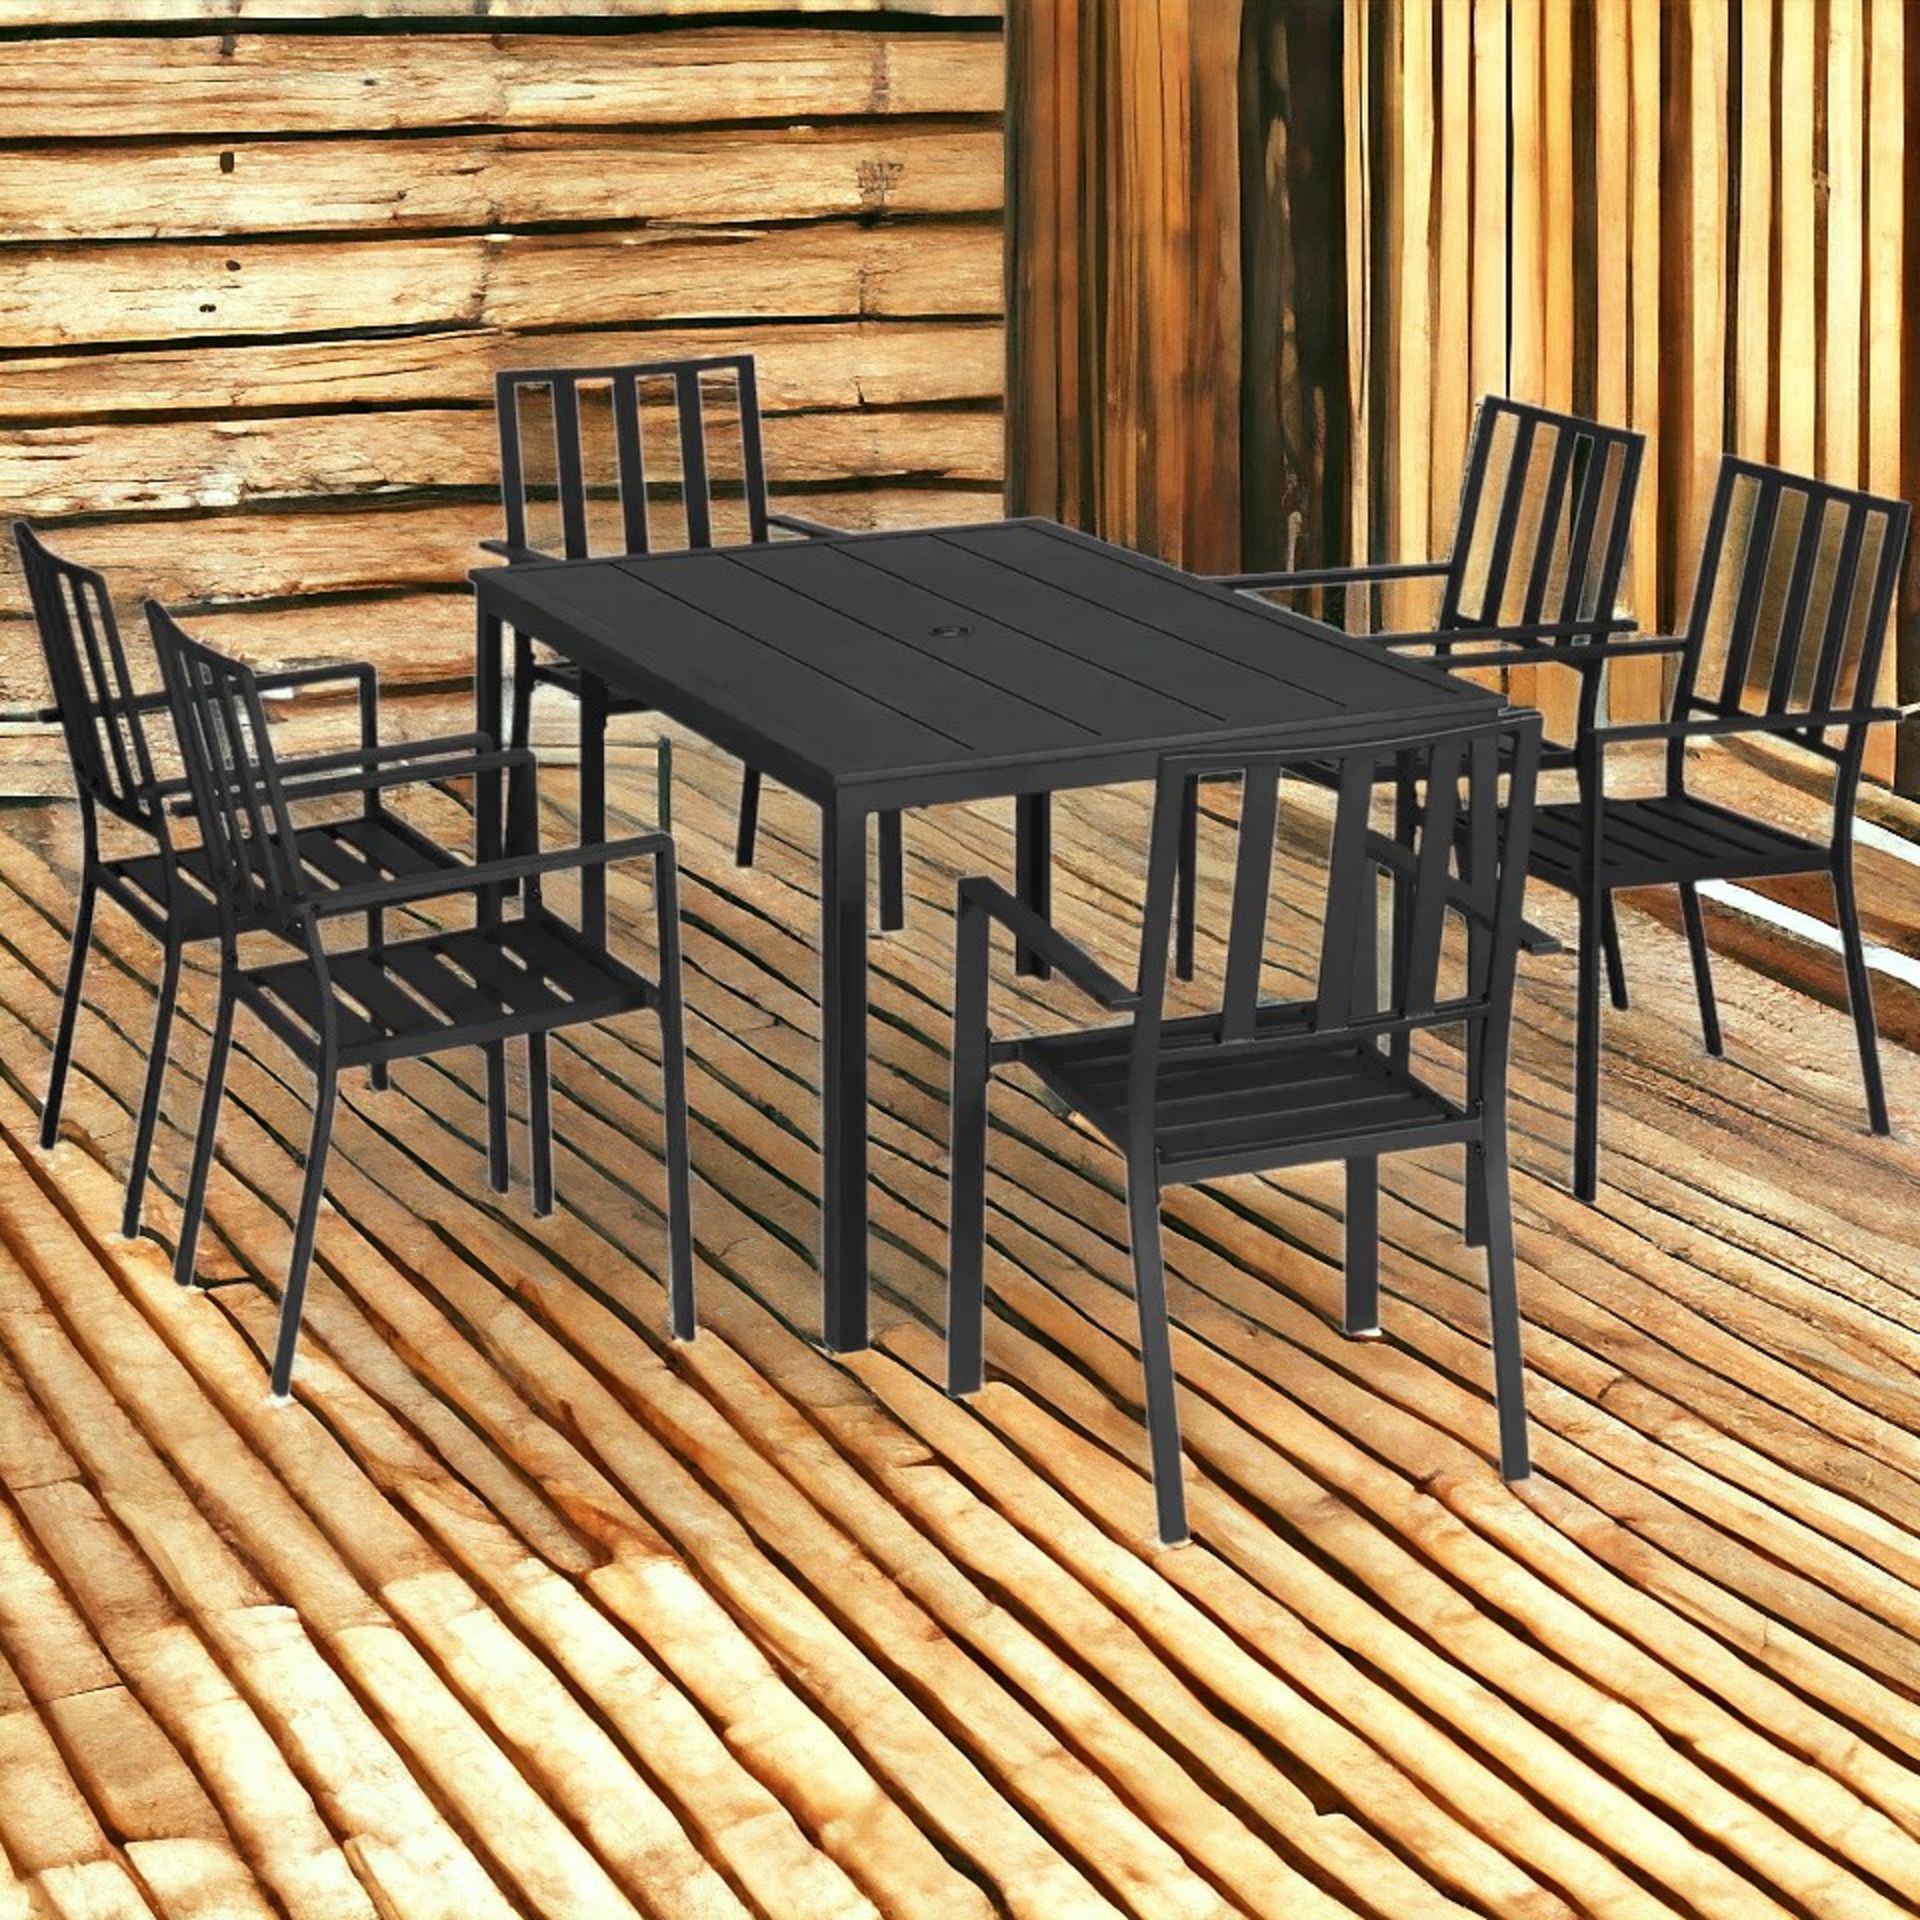 FREE DELIVERY-BRAND NEW 7 PCS GARDEN DINING SET W/ STACKABLE CHAIRS AND METAL TOP TABLE, BLACK - Image 2 of 2